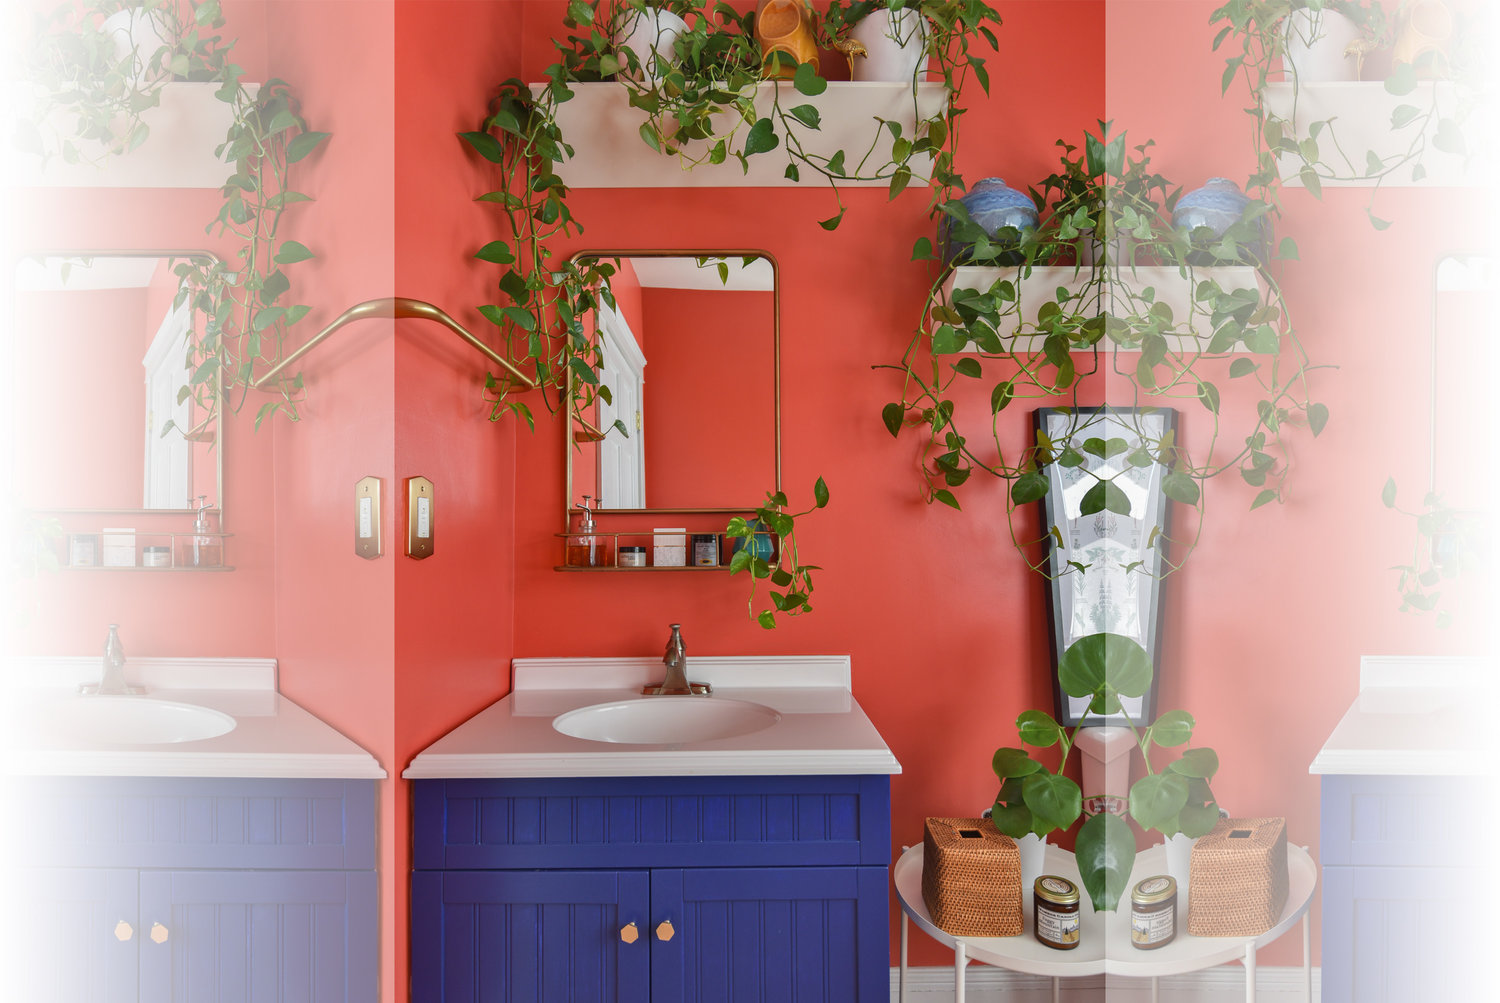 Coral walls infuse small spaces with personality